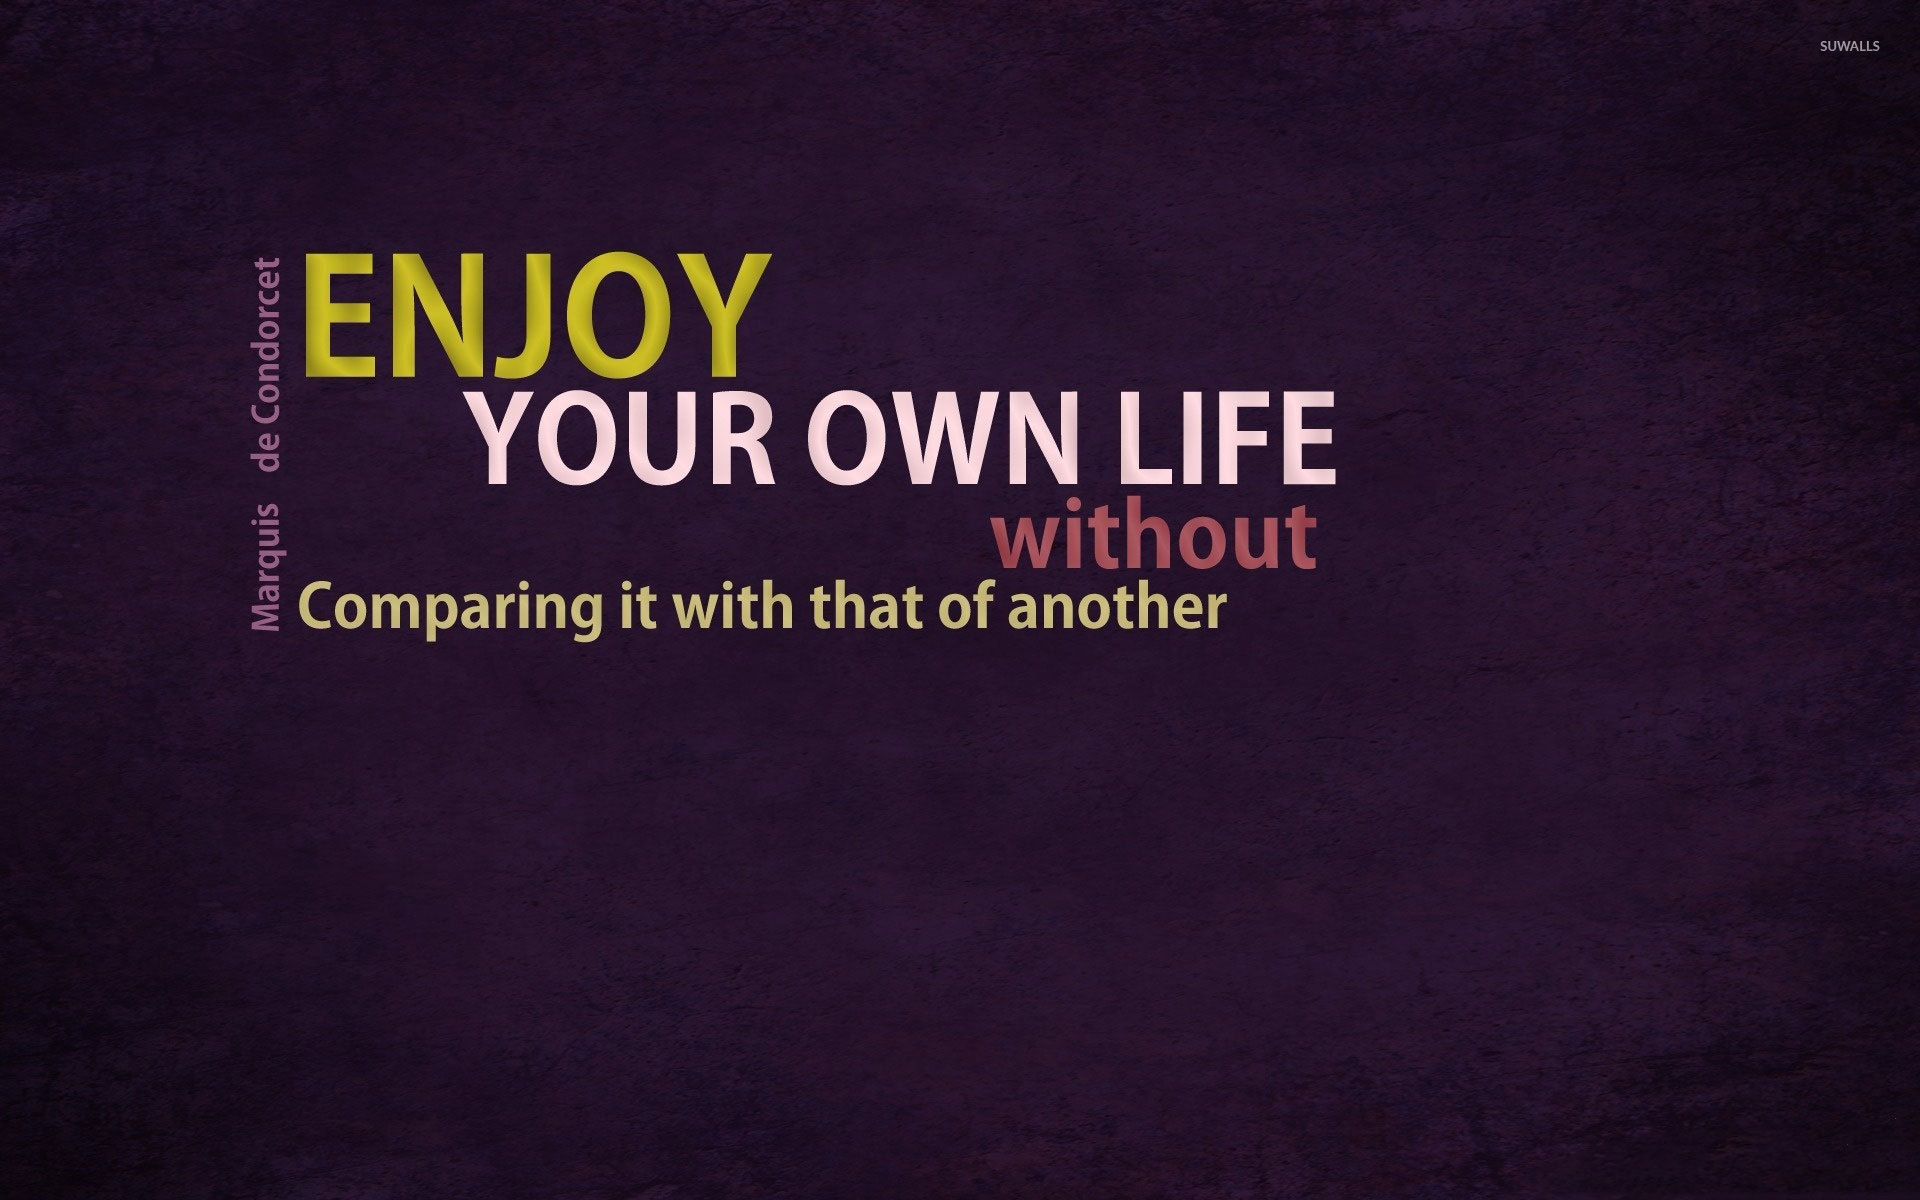 Enjoy your own life wallpaper - Quote wallpapers - #52460